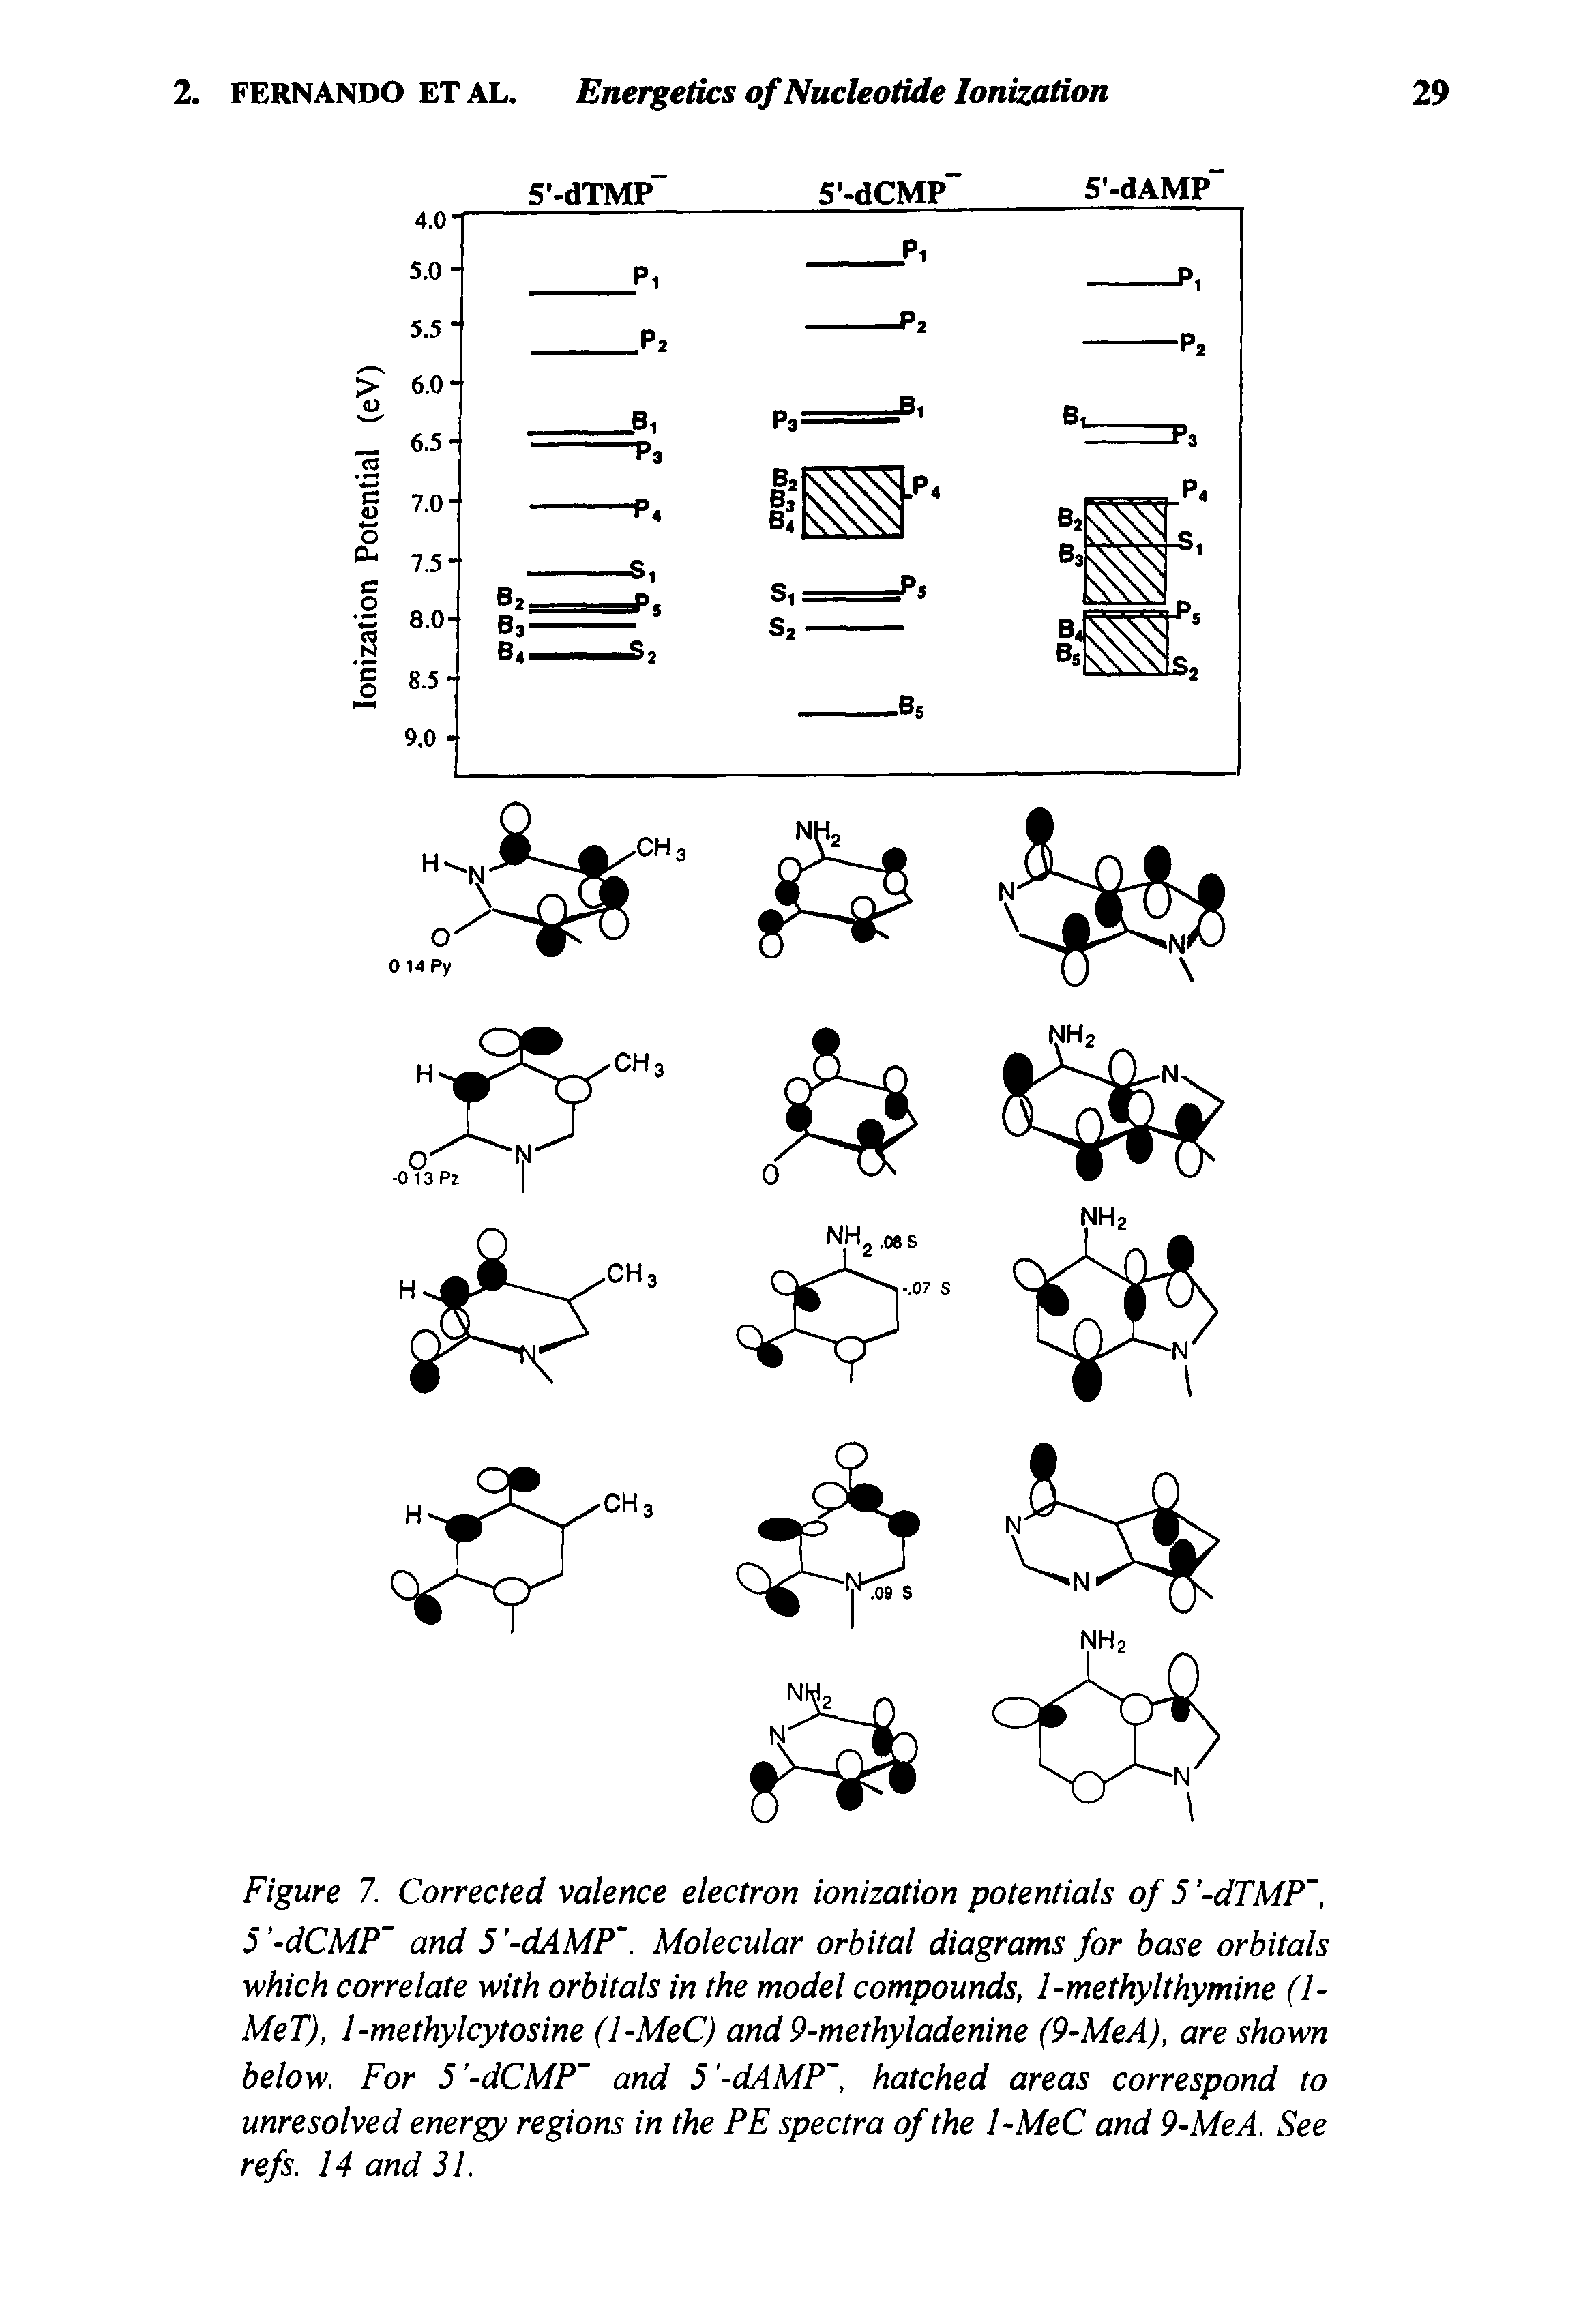 Figure 7. Corrected valence electron ionization potentials of 5 -dTMP, 5 -dCMP and 5 -dAMP. Molecular orbital diagrams for base orbitals which correlate with orbitals in the model compounds, 1-methylthymine (1-MeT), 1-methylcytosine (1-MeC) and 9-methyladenine (9-MeA), are shown below. For 5 -dCMP and 5 -dAMP, hatched areas correspond to unresolved energy regions in the PE spectra of the 1-MeC and 9-MeA. See refs. 14 and 31.